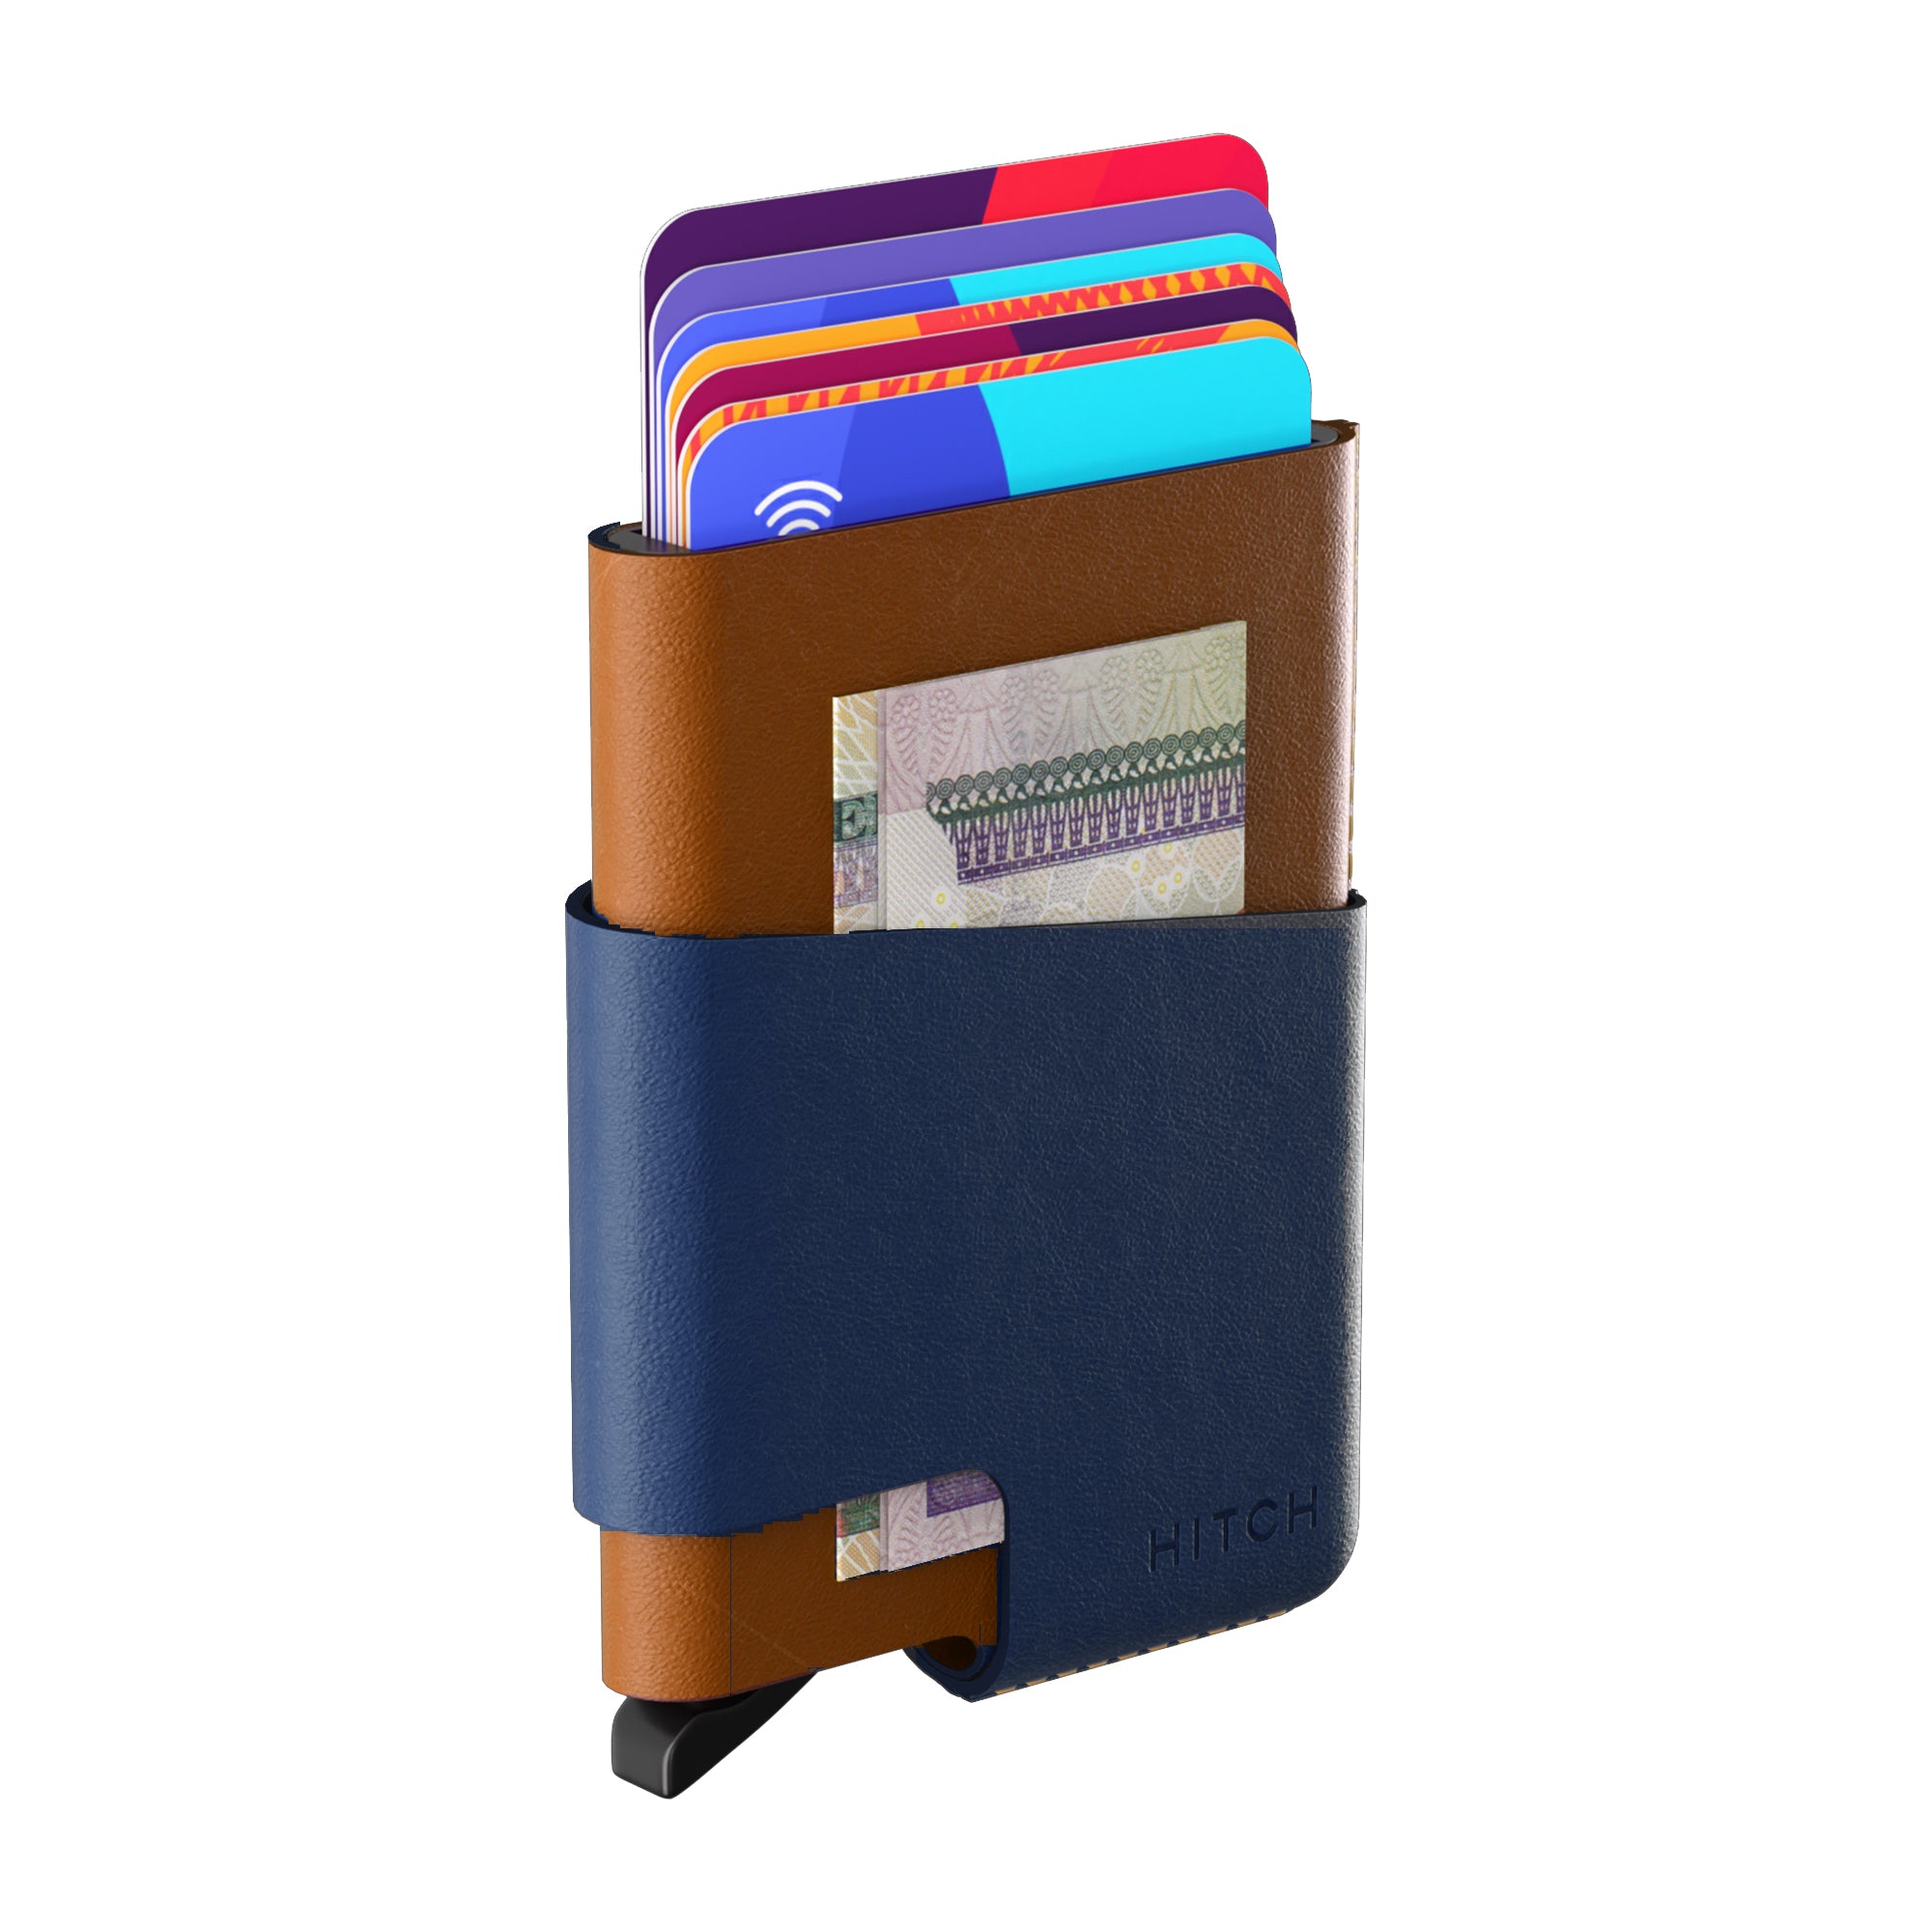 Brown and blue leather cardholder wallet with multiple credit cards and cash visible.